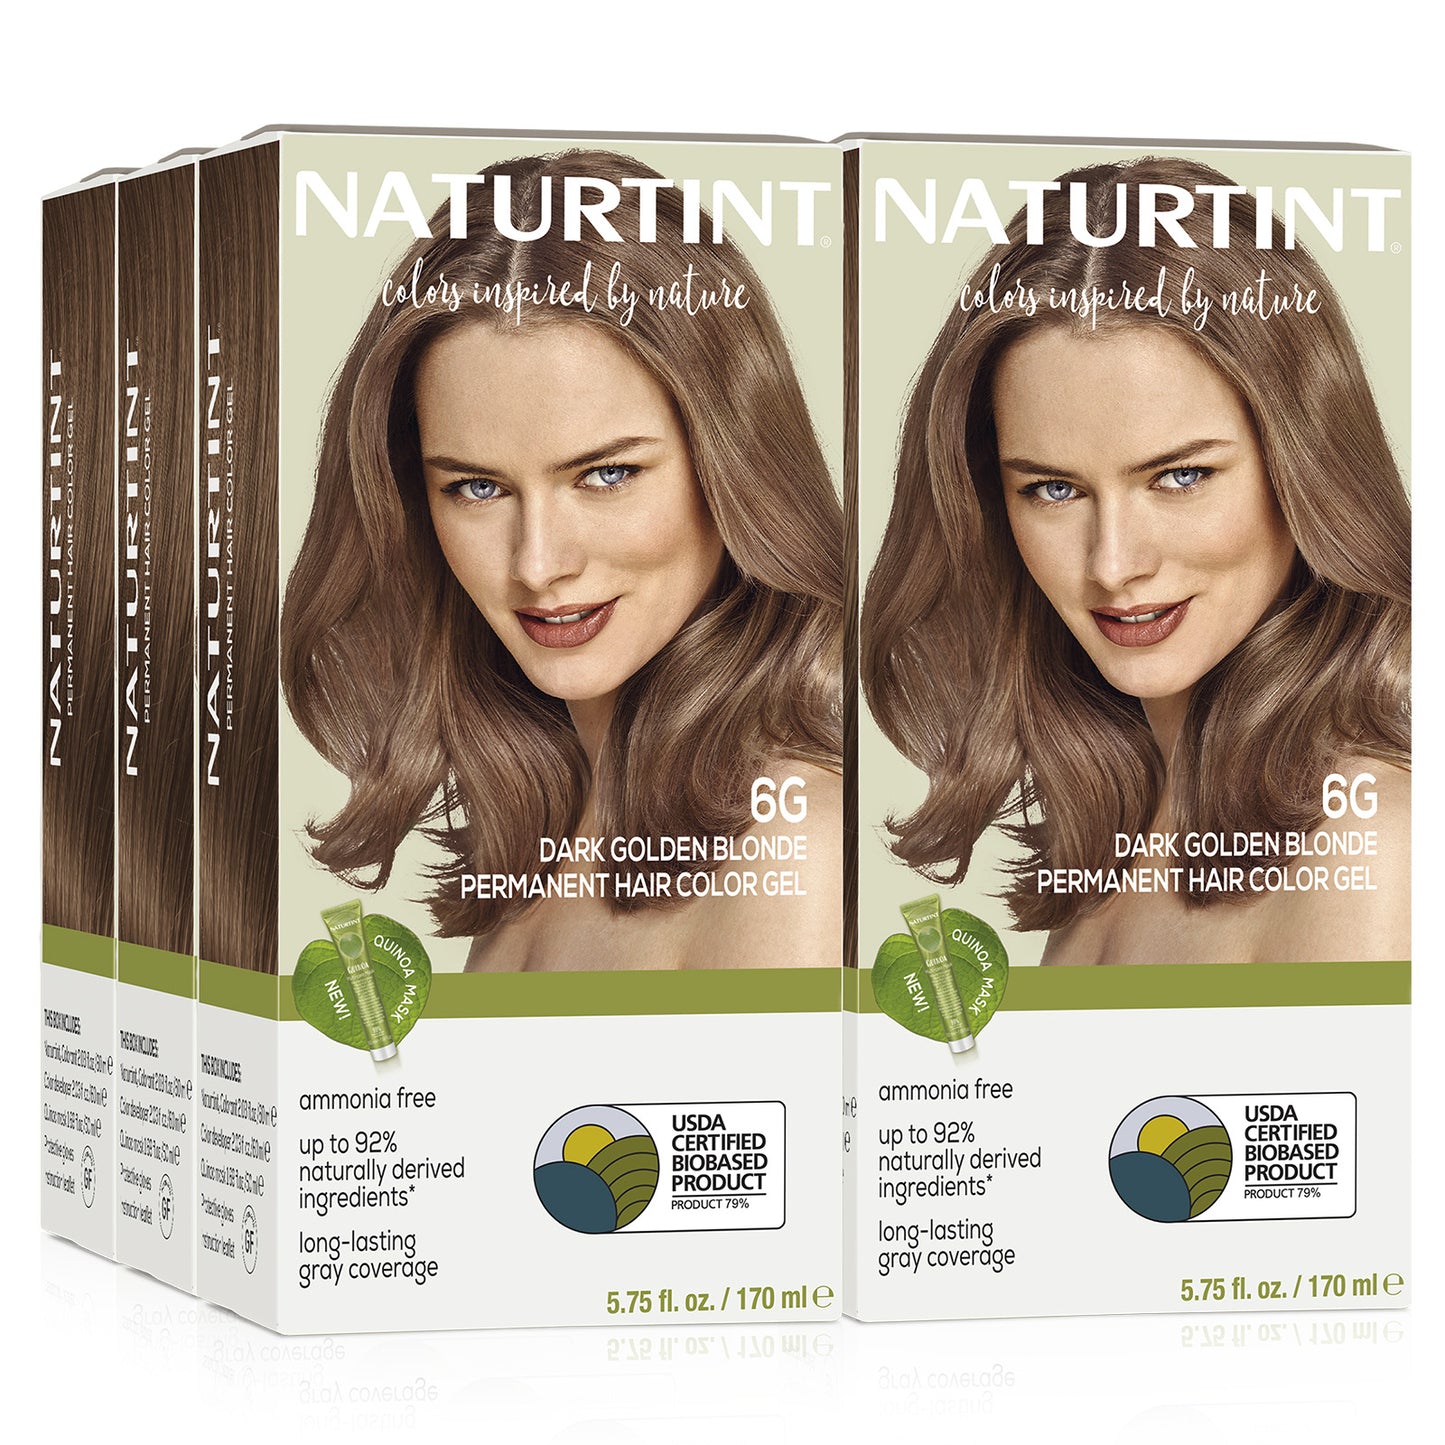 Naturtint Permanent Hair Color 6G Dark Golden Blonde (Packaging may vary)